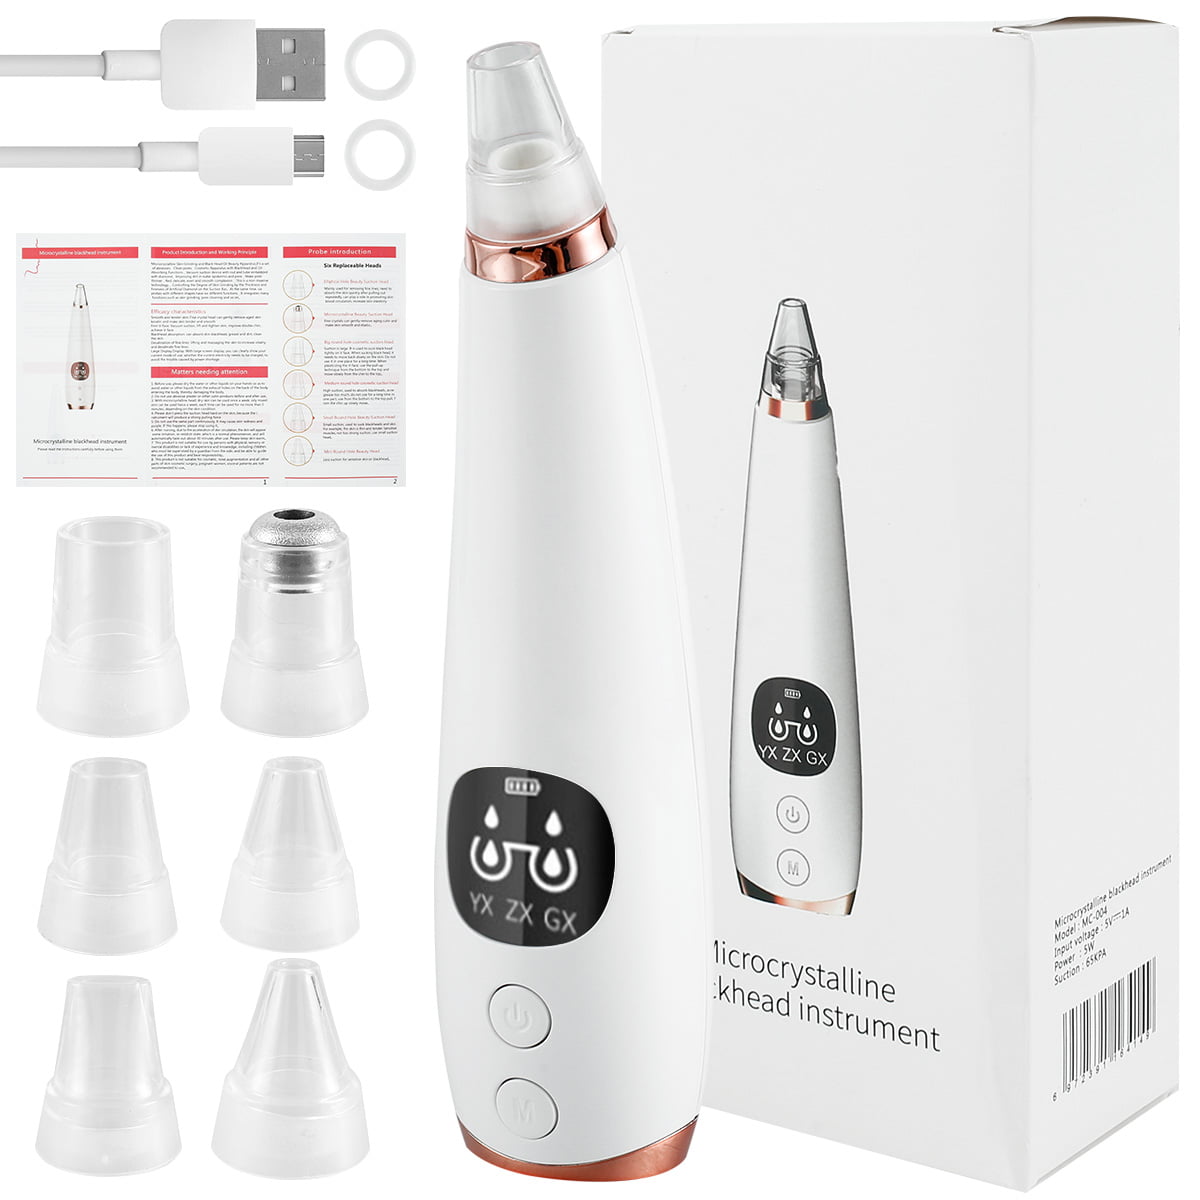 Yous Auto Blackhead Remover Pore Vacuum Cleaner Professional Pore Suction  Face Acne Cleaner USB Rechargeable Acne Extractor with 3 Modes 6 Suction 